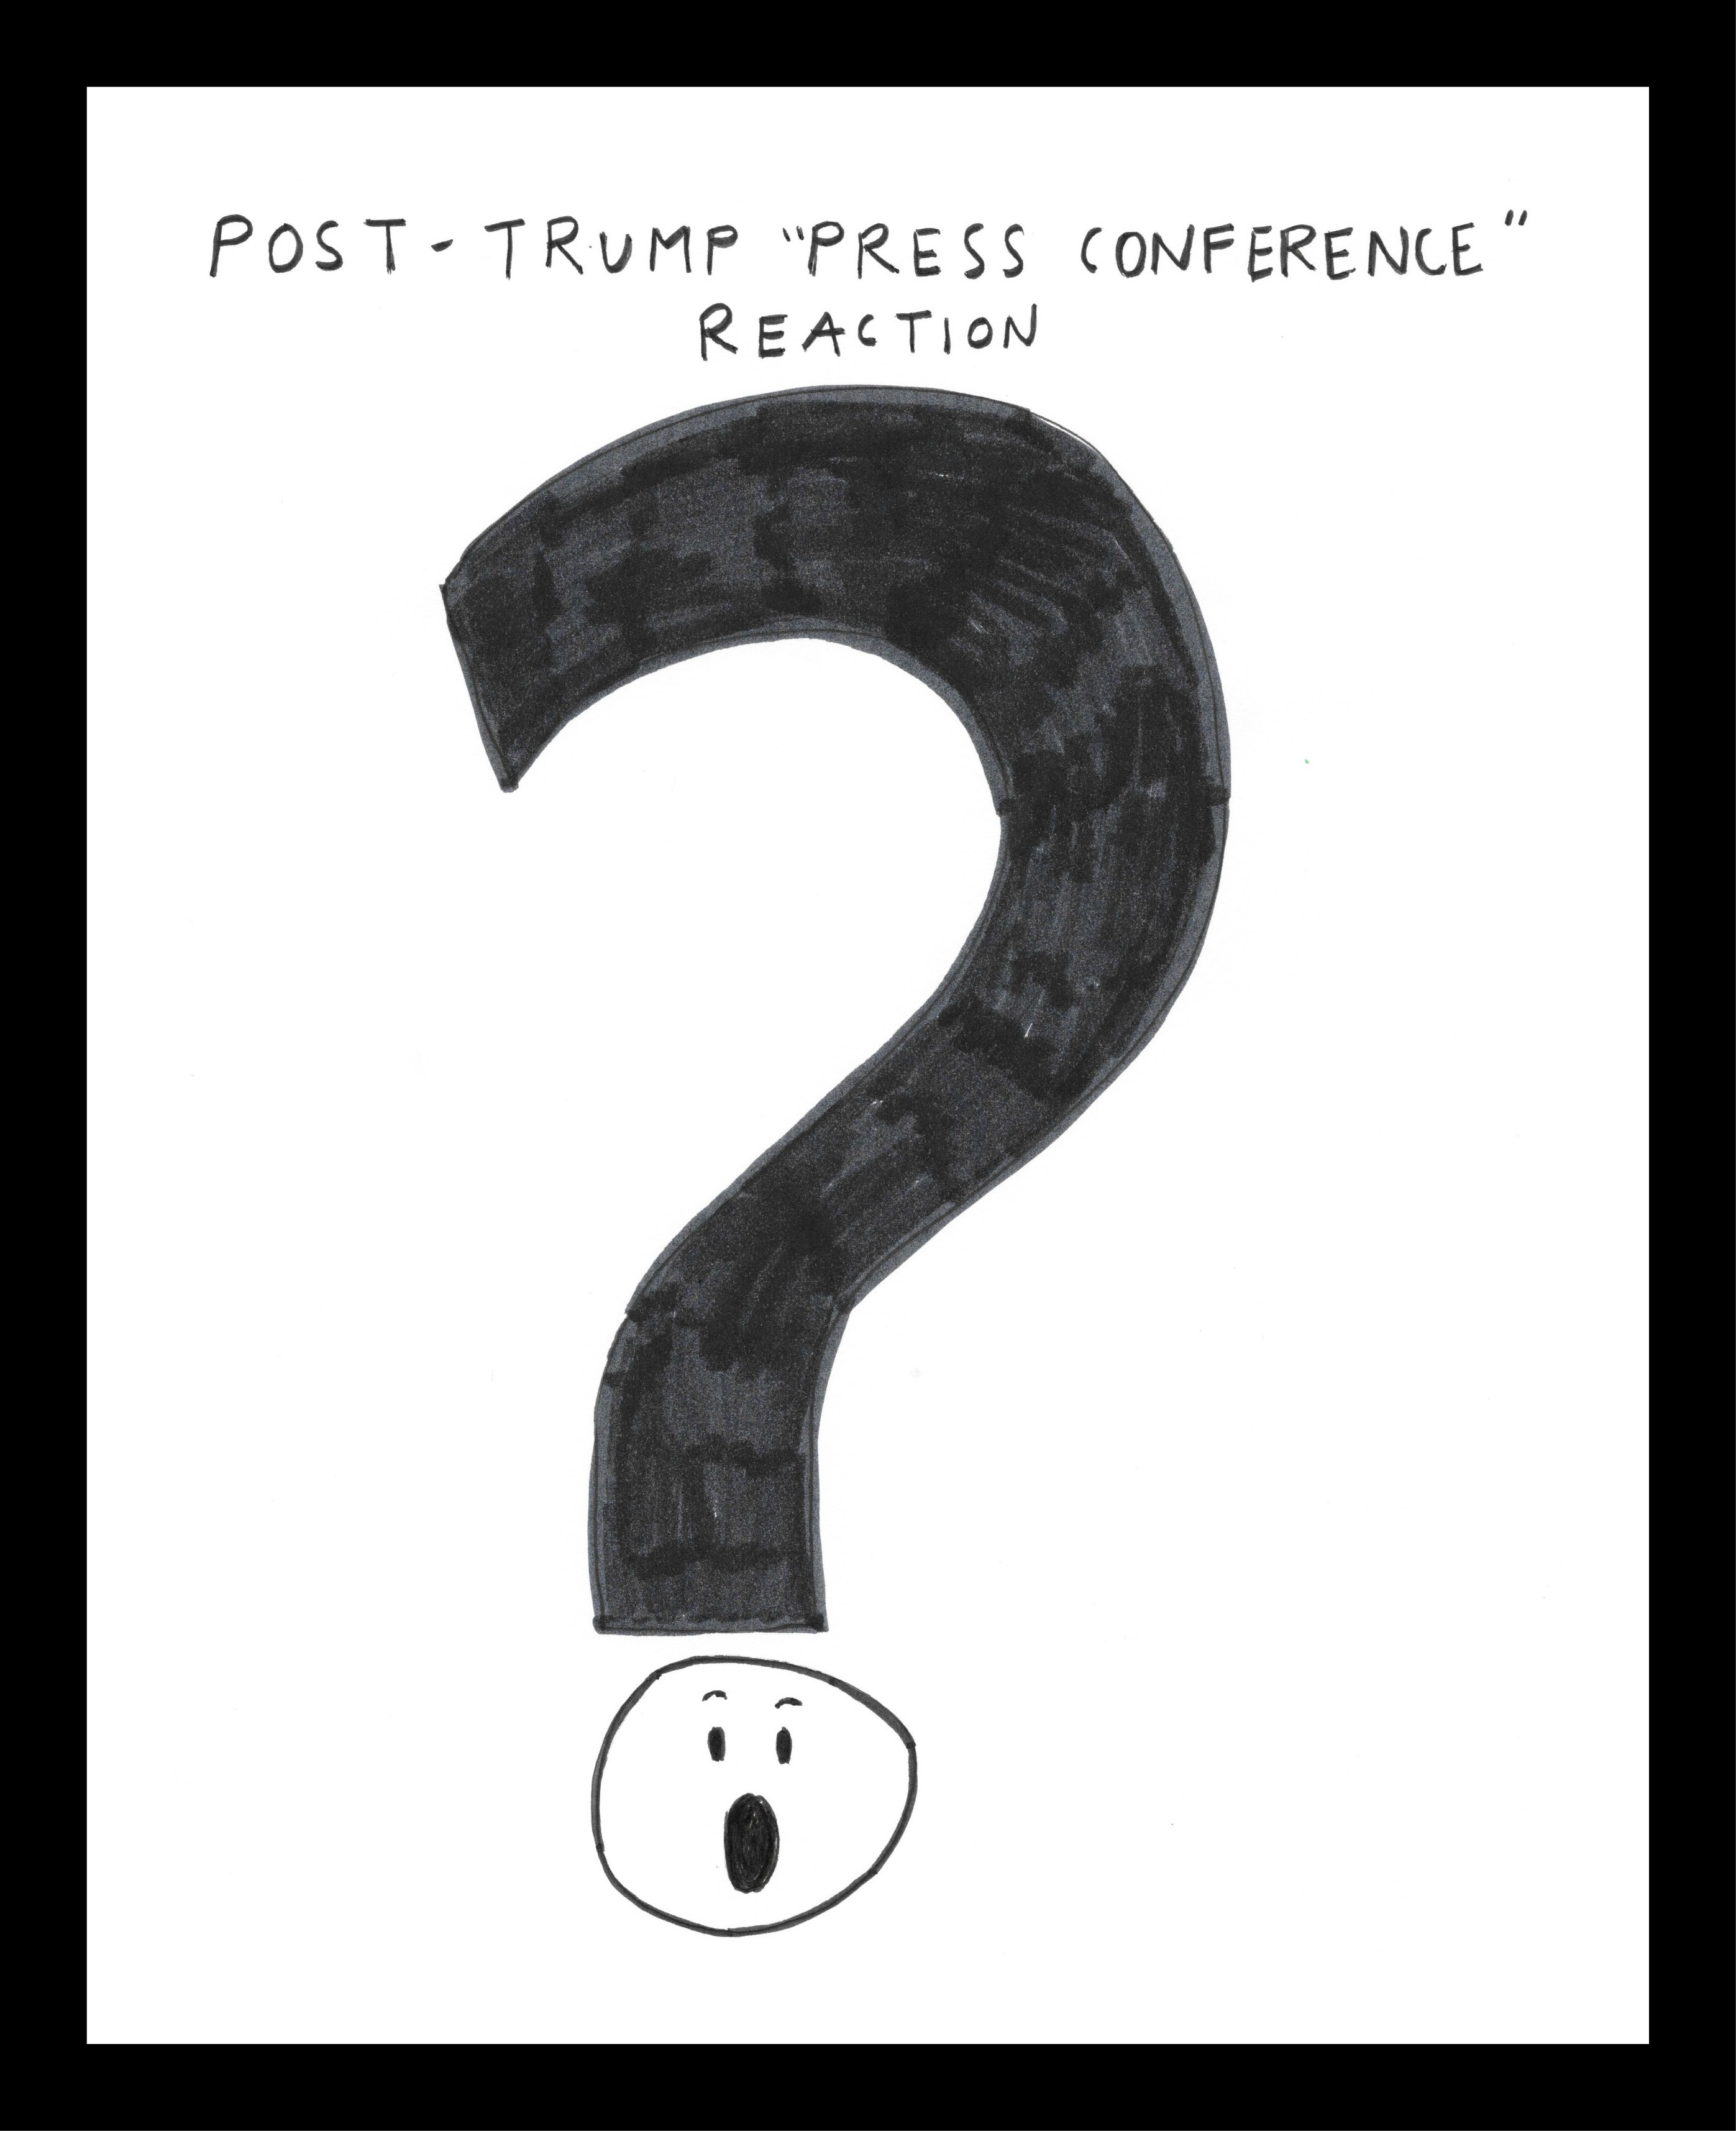 Post-Trump "Press Conference" Reaction